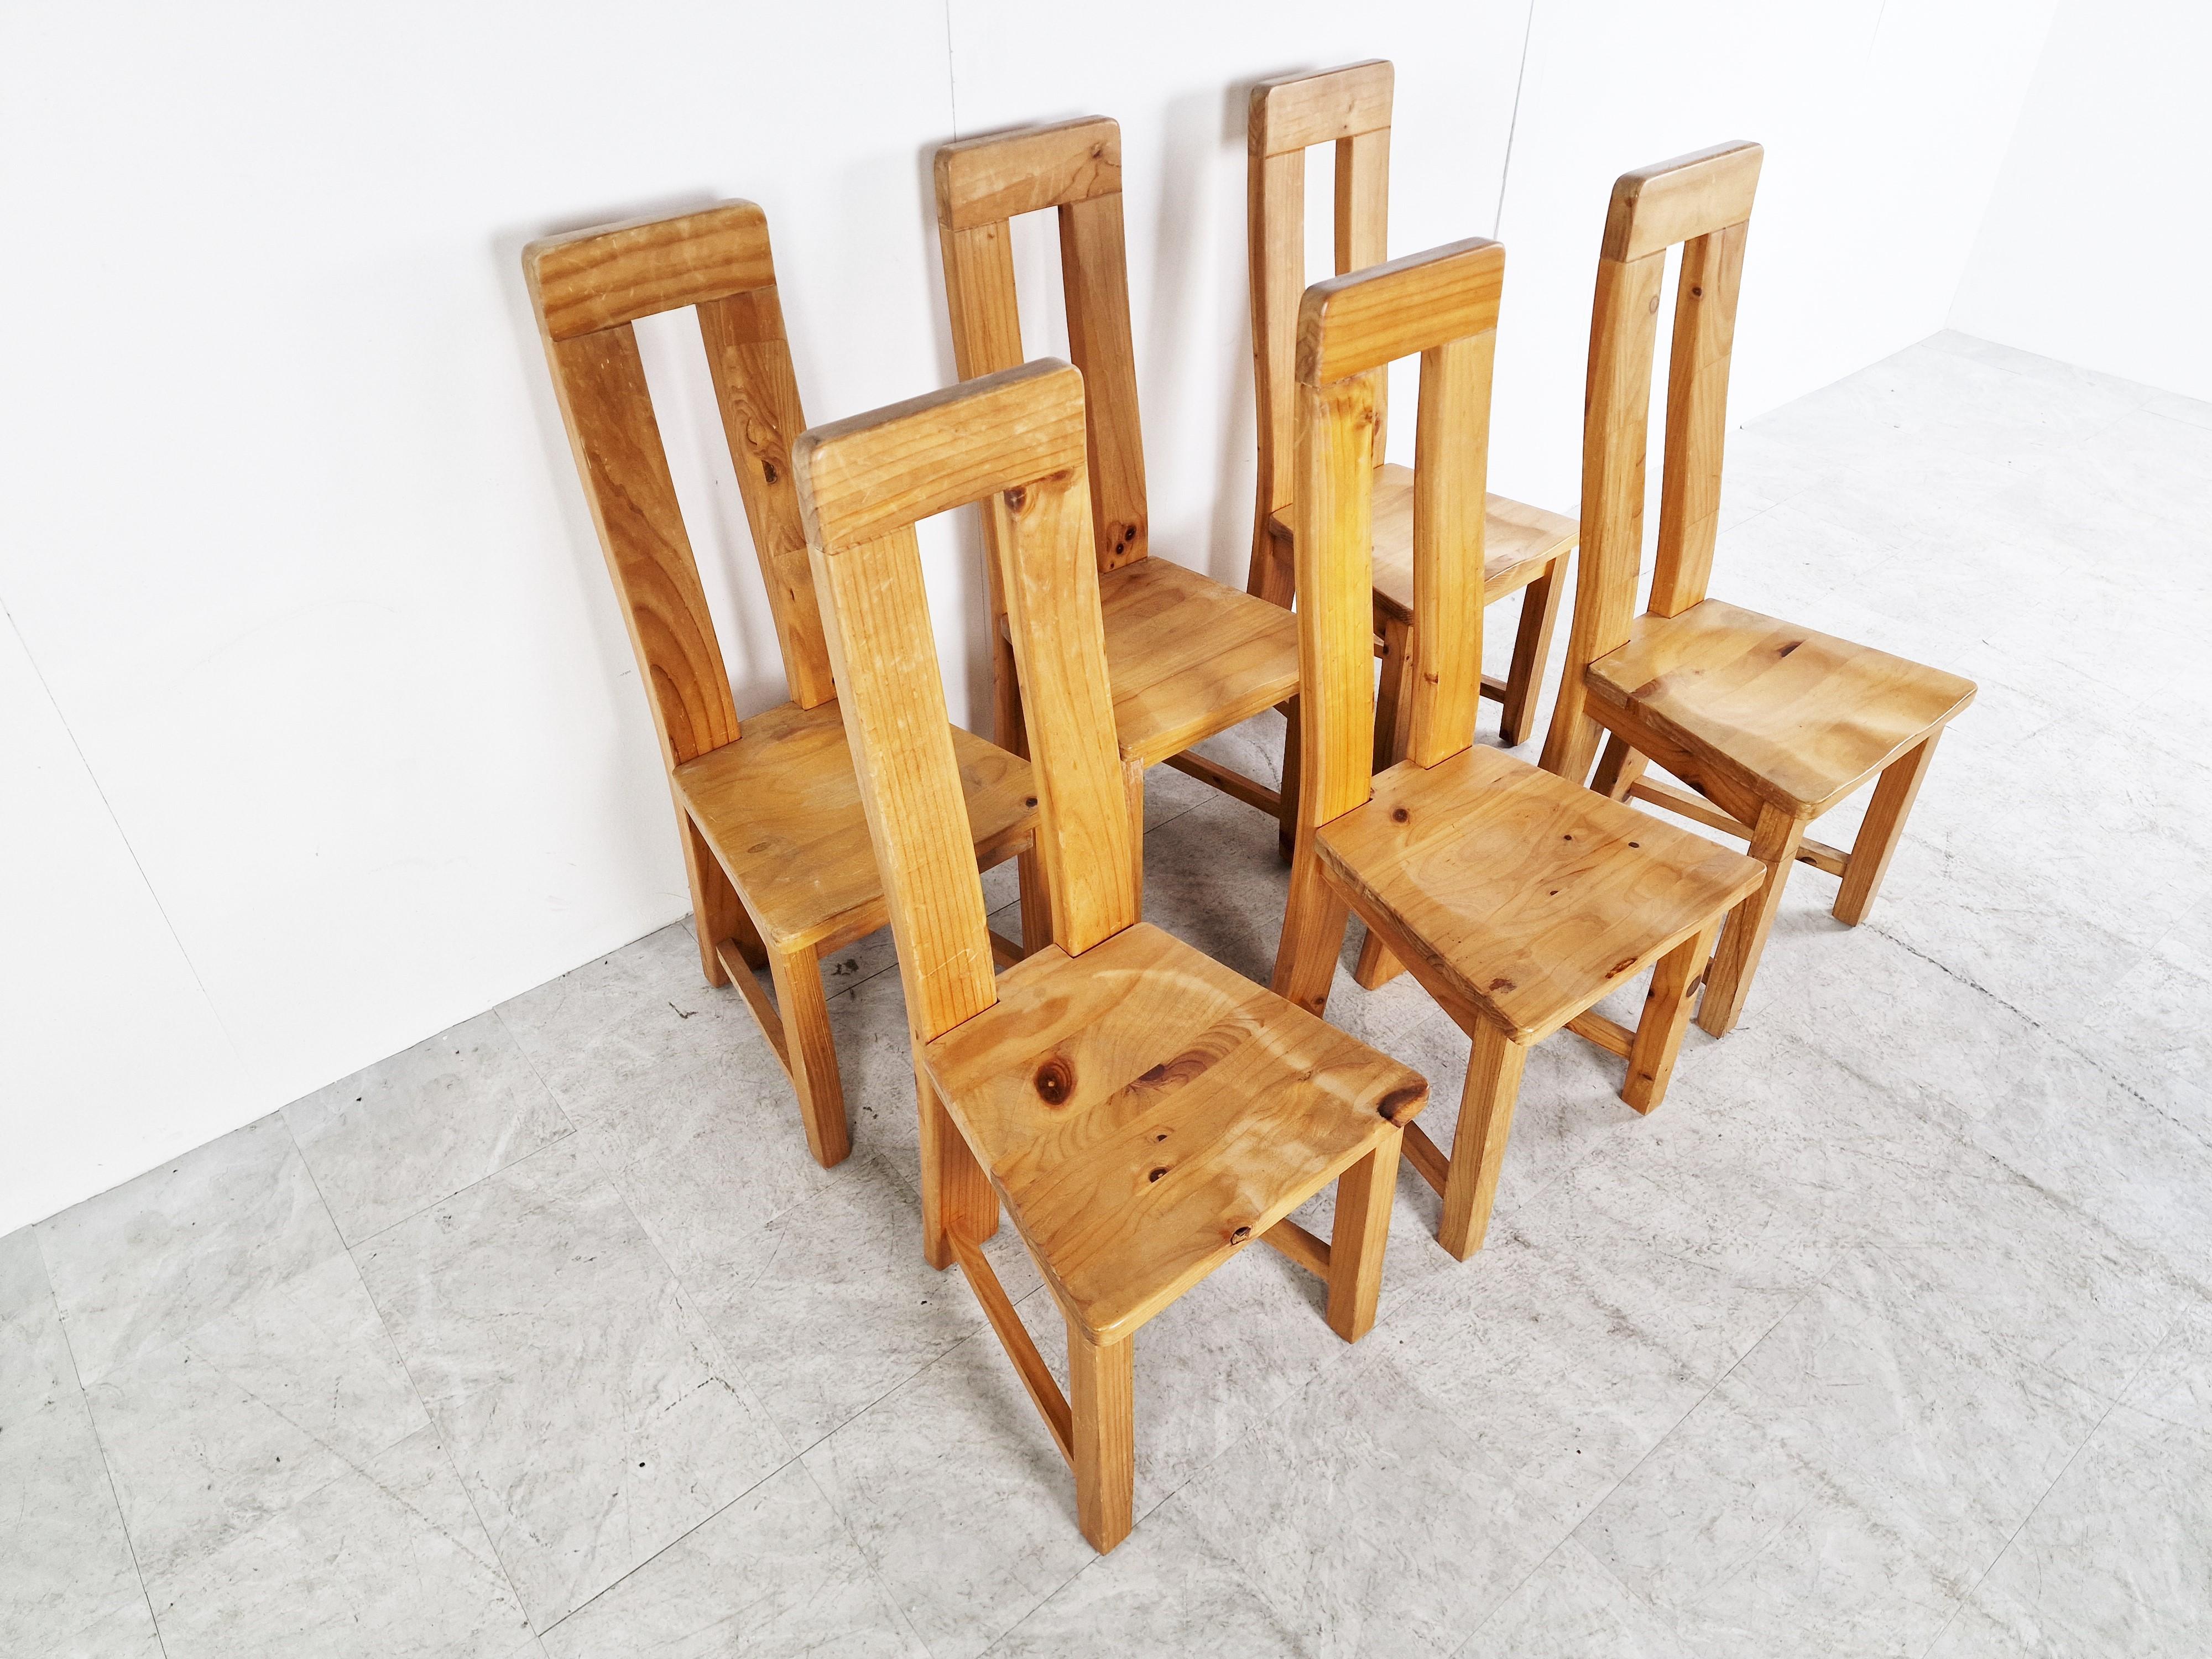 Set of 6 solid pine wood highback dining chairs.

They have a simple, functional and sturdy design which is timeless.

The chairs are in good overall condition with normal age related wear.

The chairs have a cosy and warm feeling about